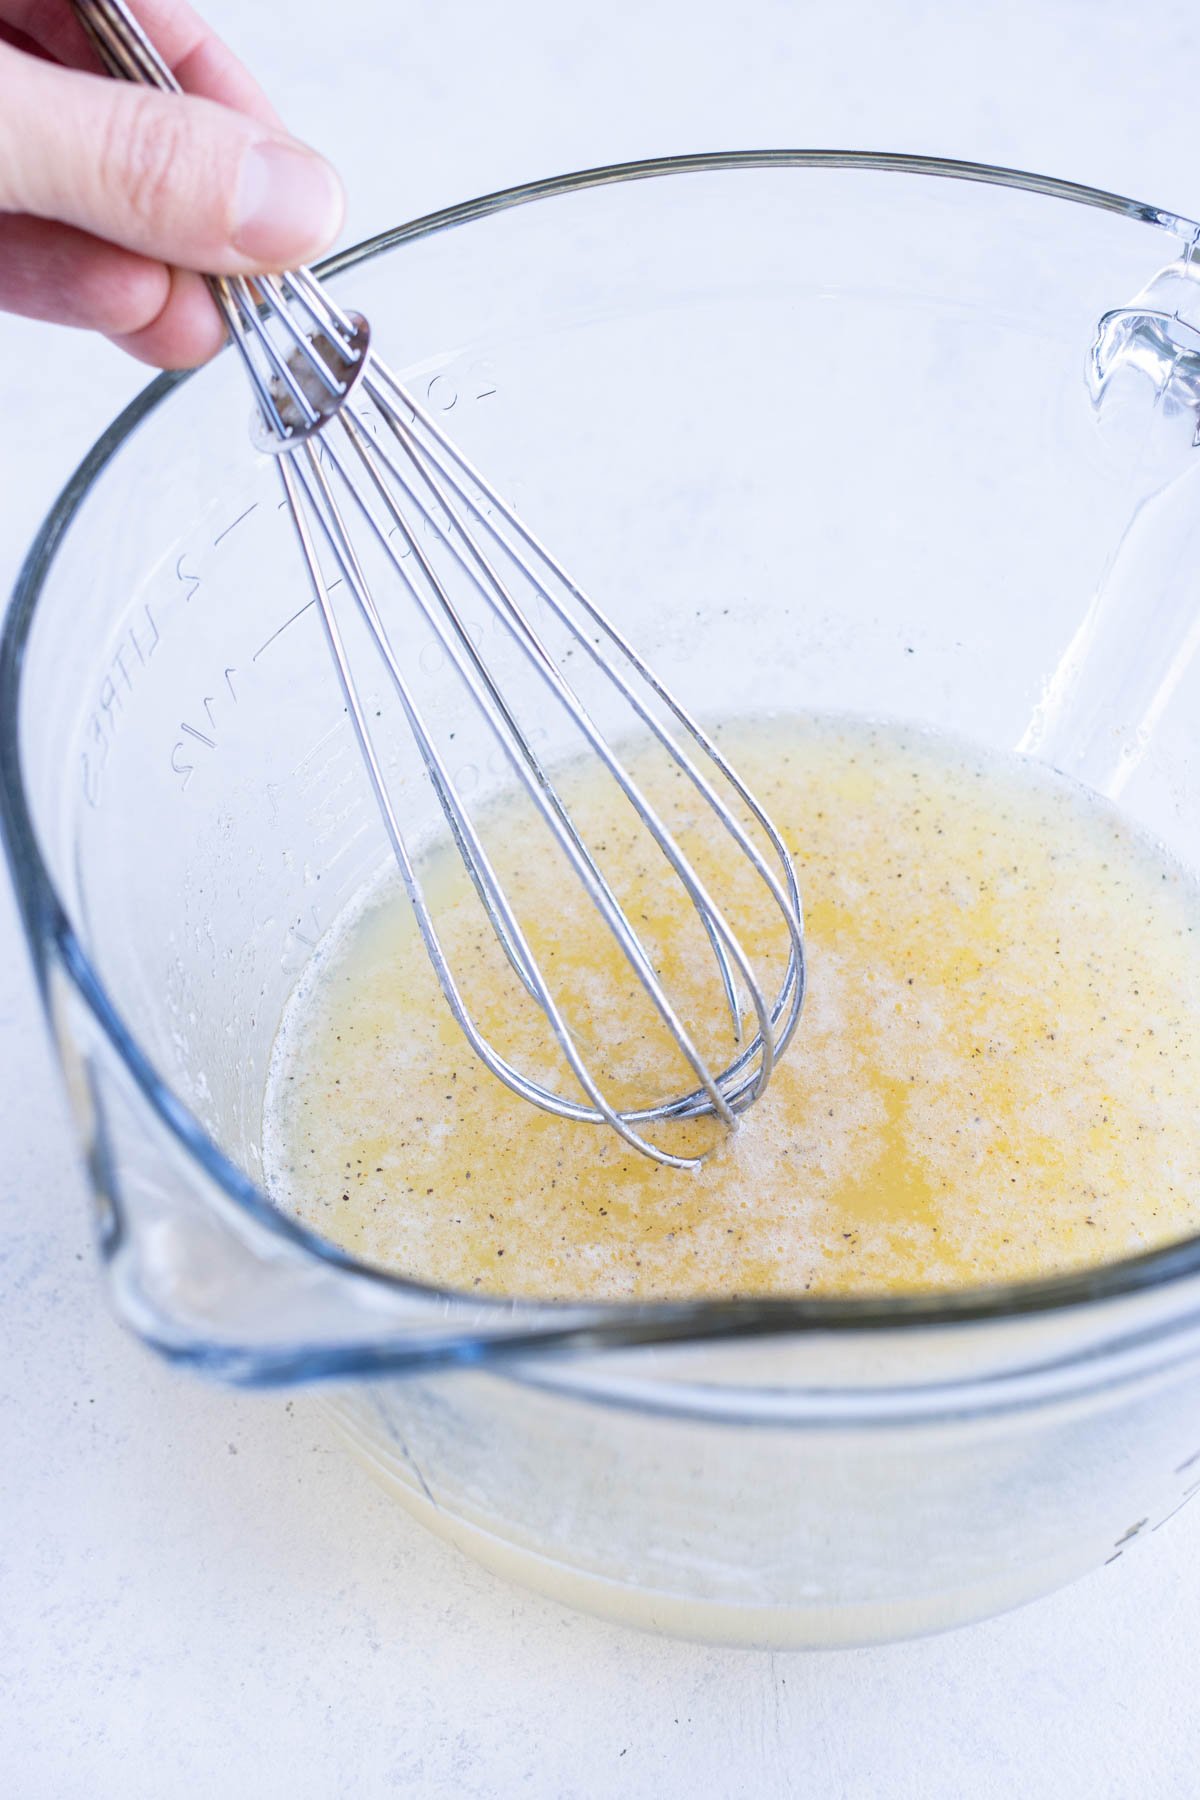 Eggs are whisked together with seasonings in a bowl.